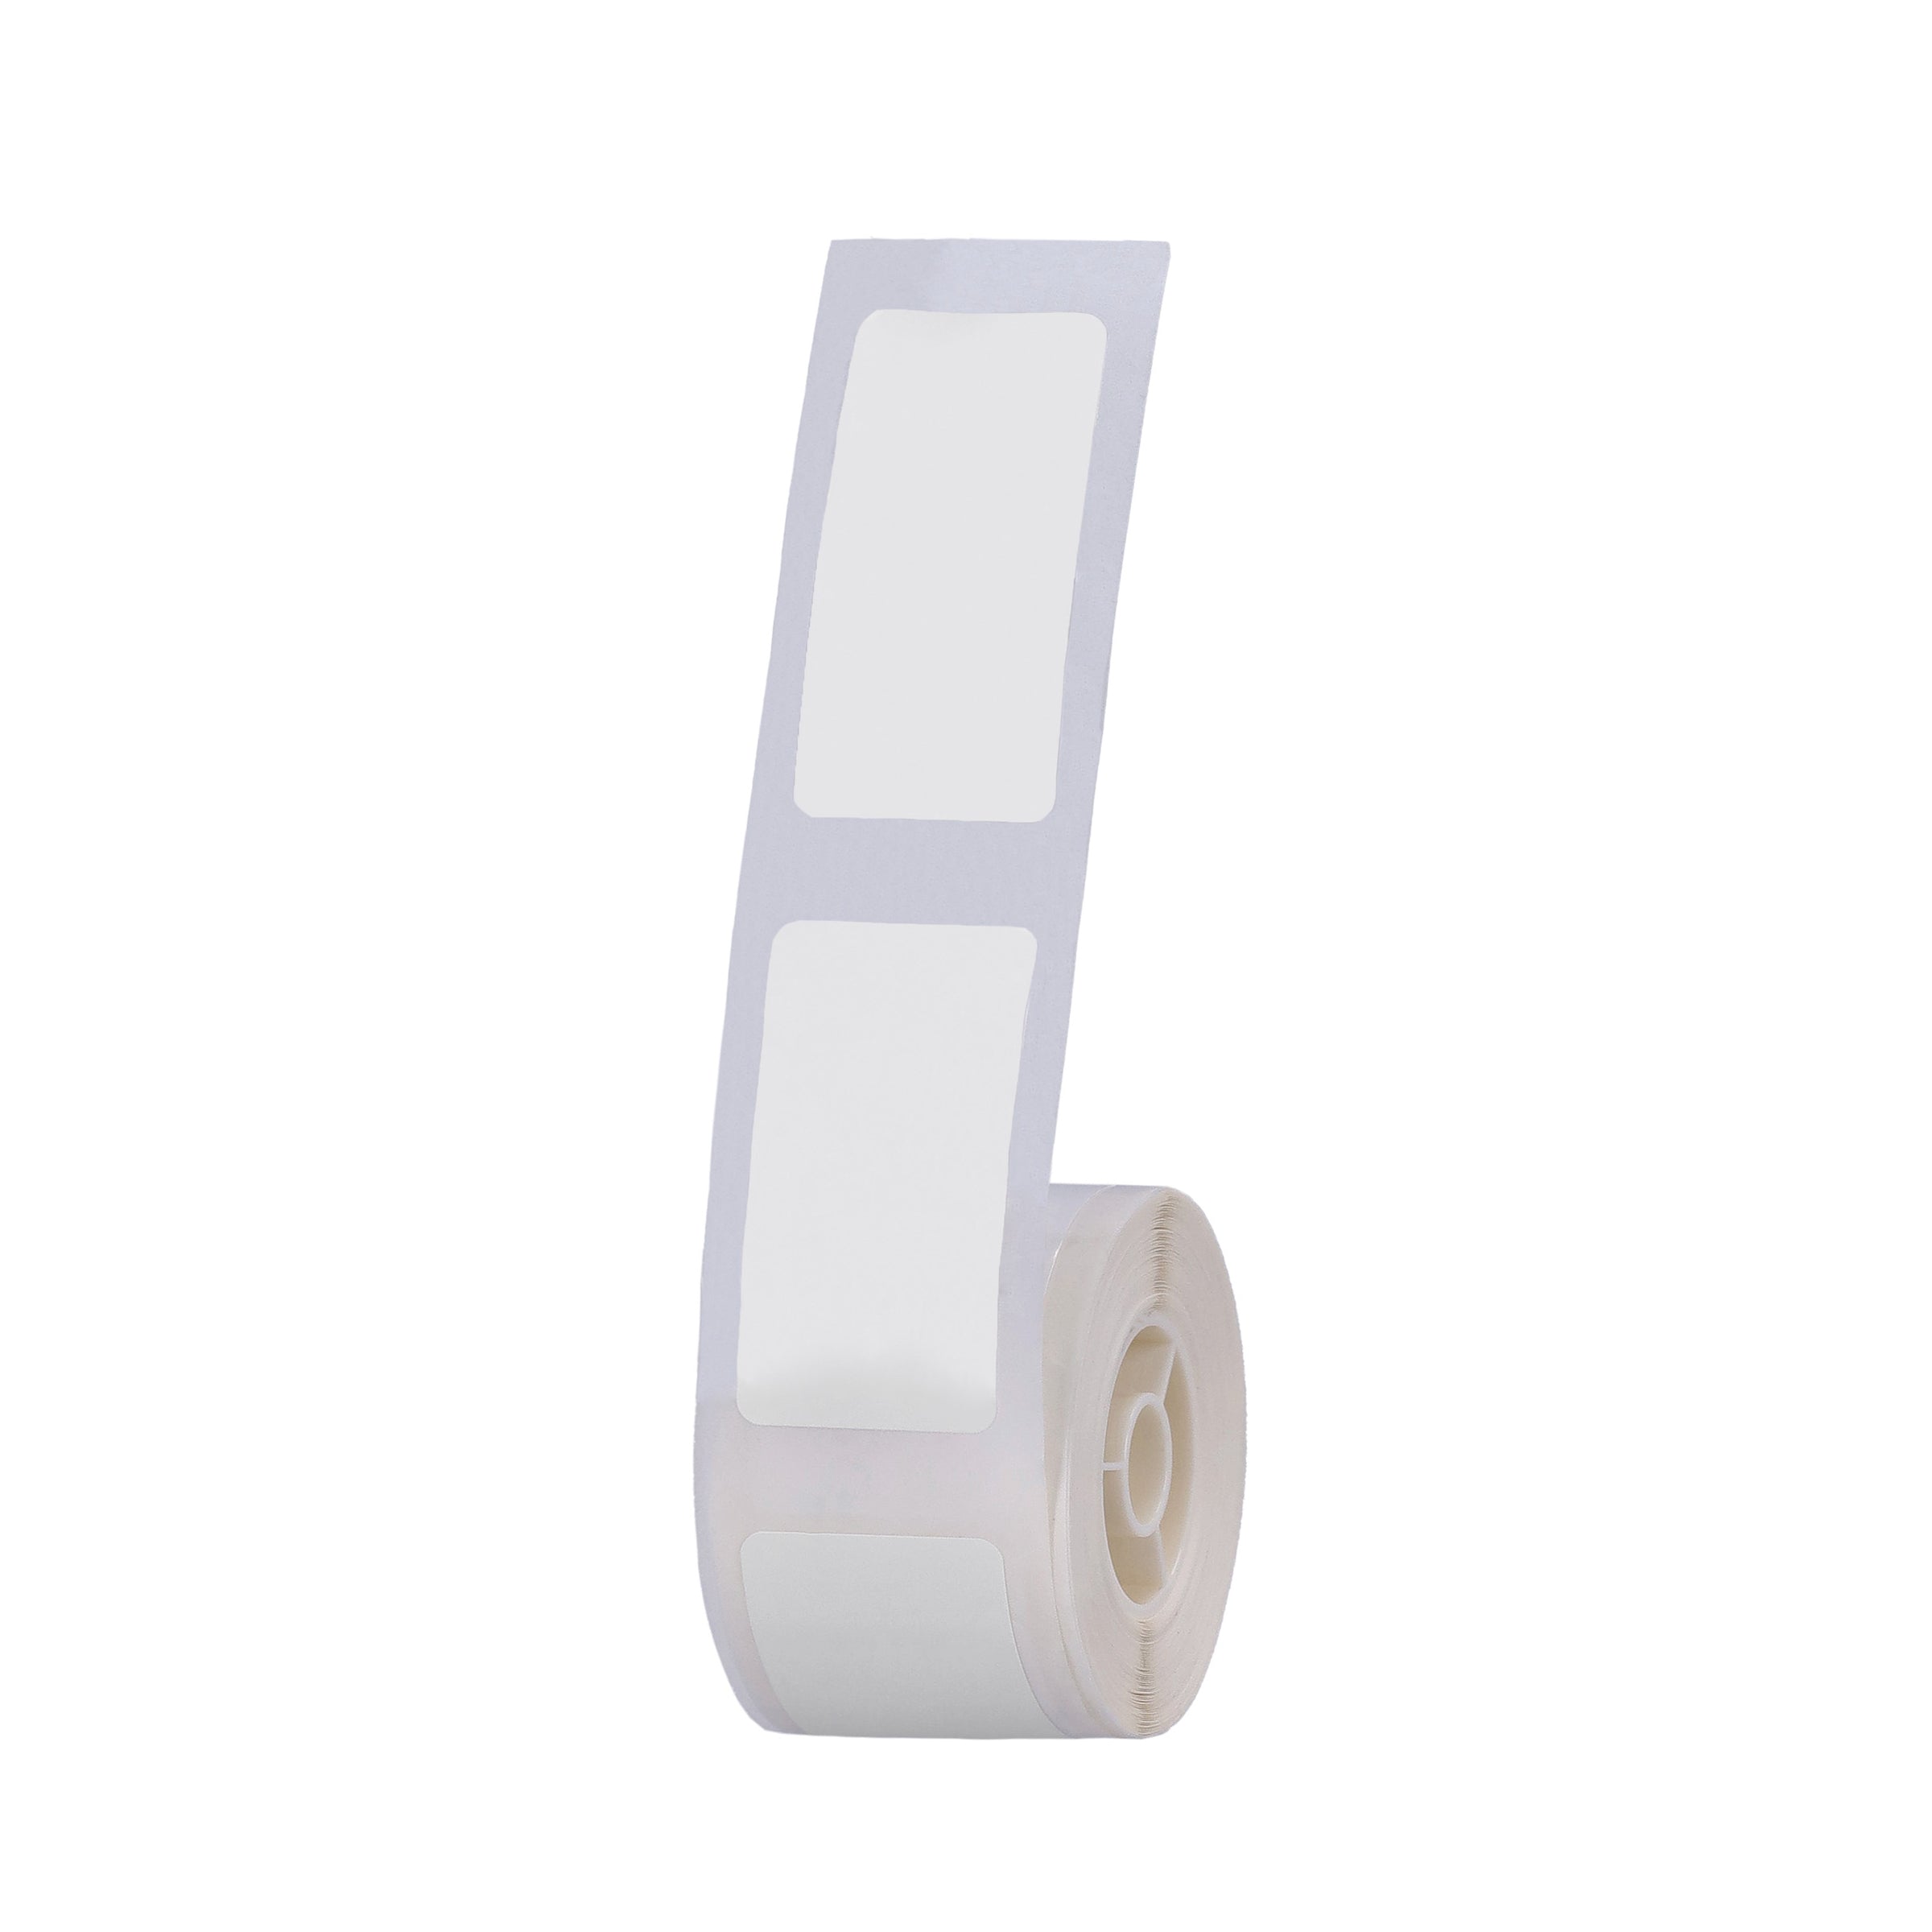 NB314 - NIIMBOT - D101 ONLY - R20*40 - 160 LABELS PER ROLL - WHITE